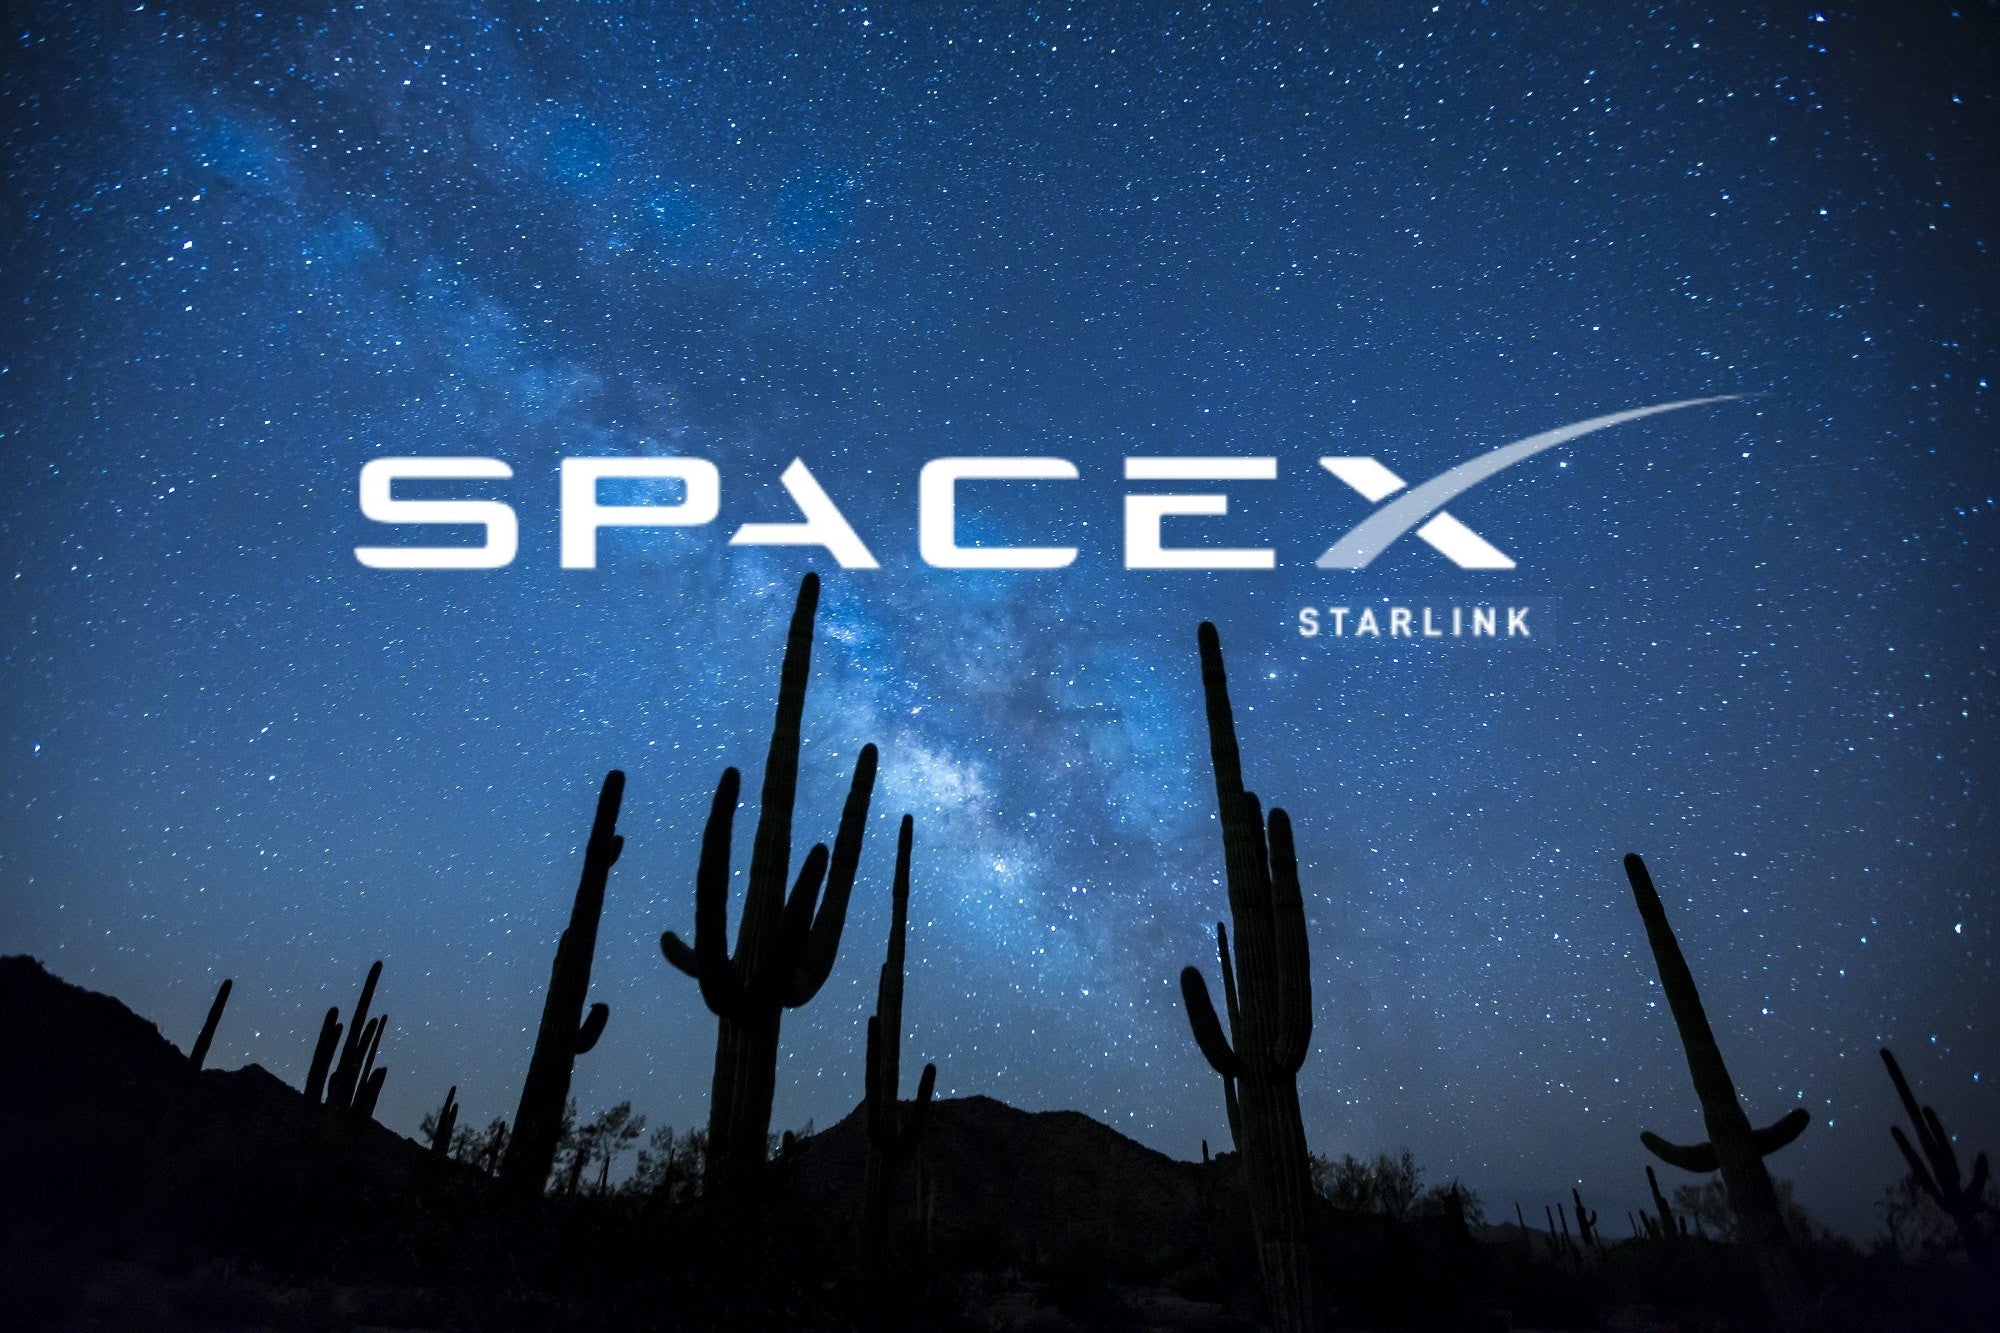 SpaceX plans to build a Starlink Ground Station at Cape Canaveral